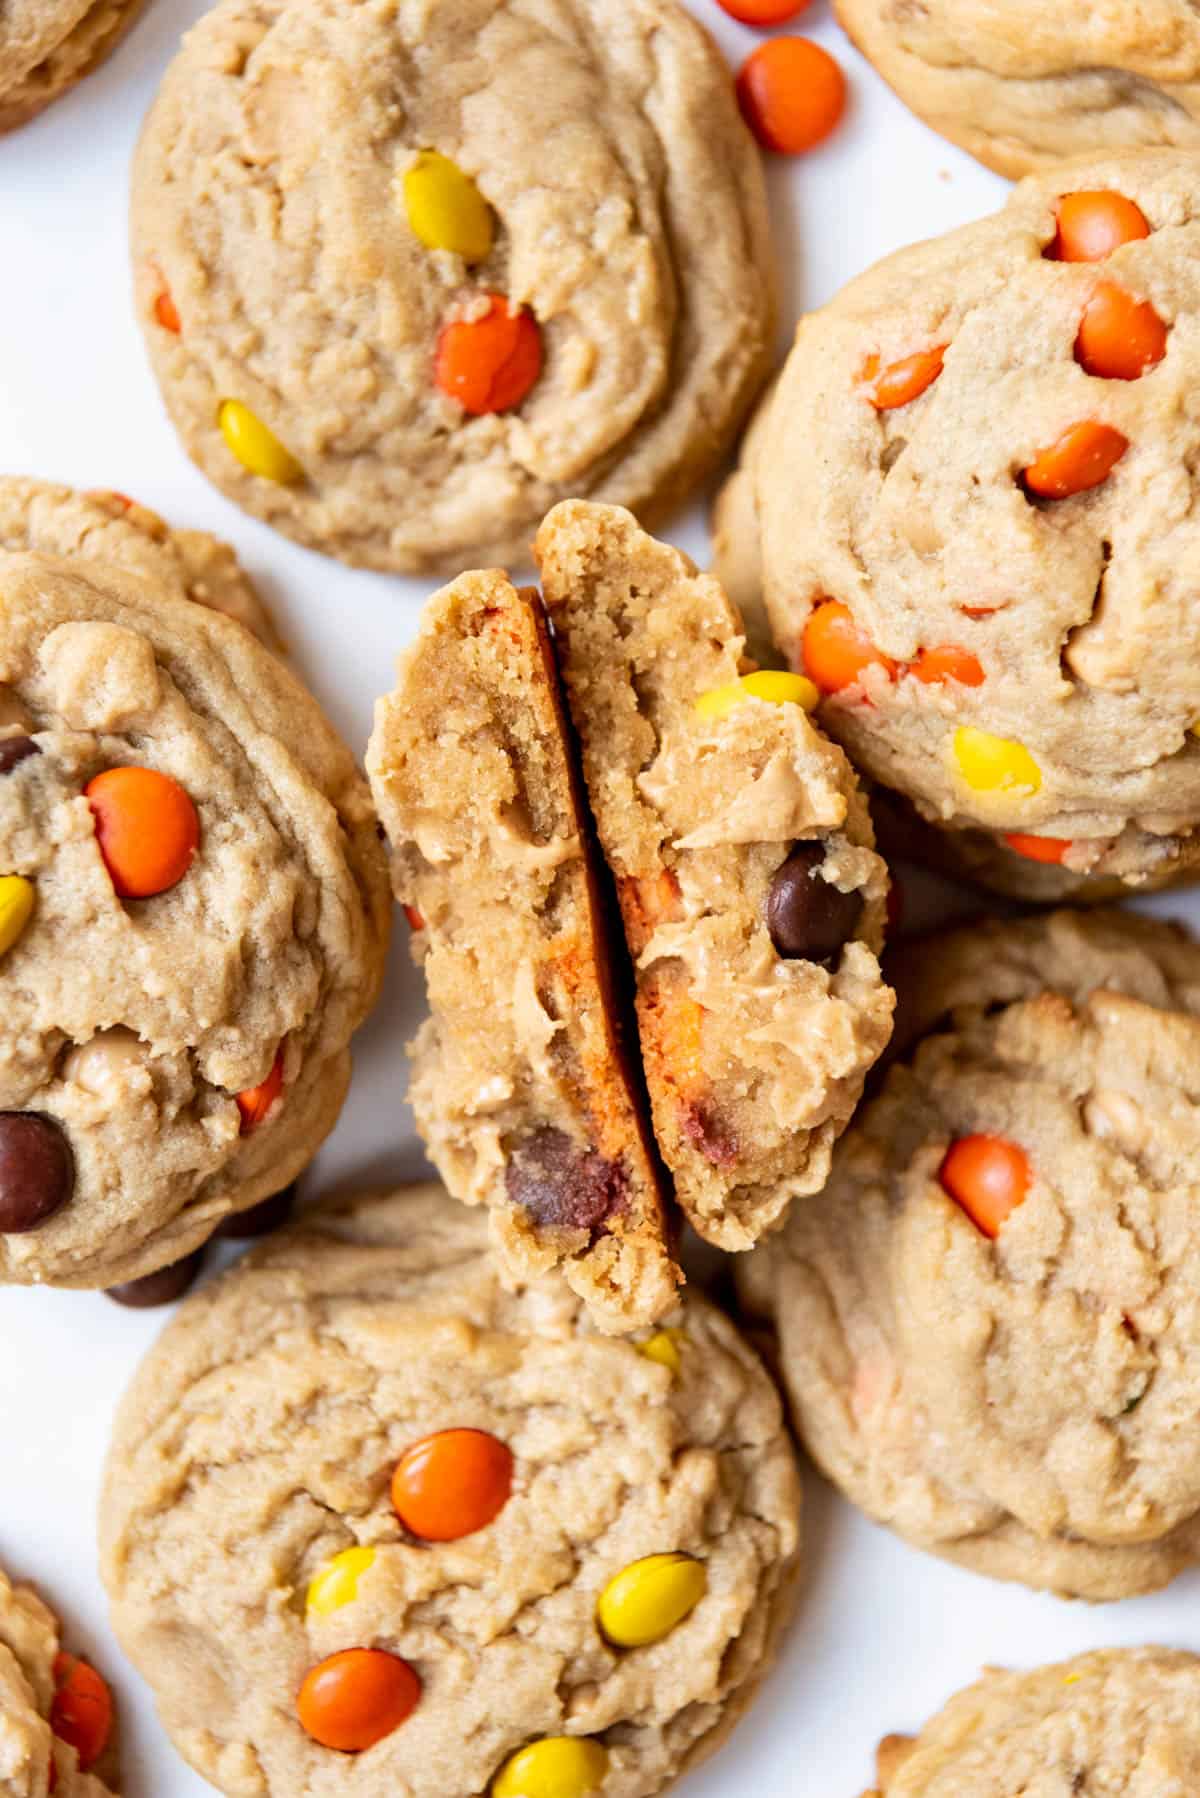 A Reese's Pieces cookie broken in half surrounded by more cookies.